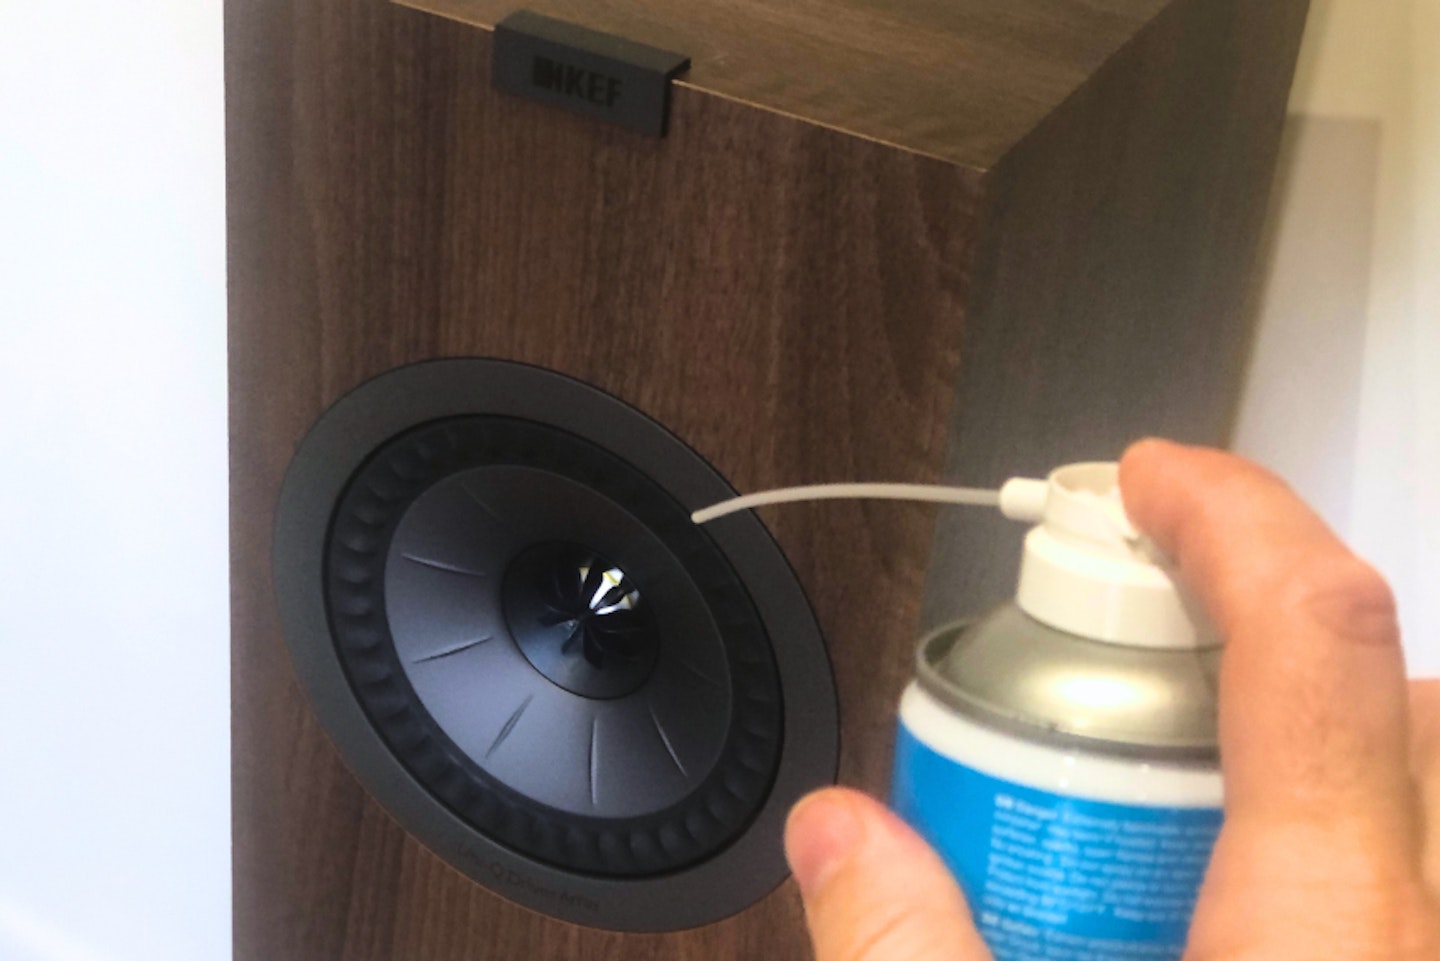 COMPRESSED AIR ON A SPEAKER